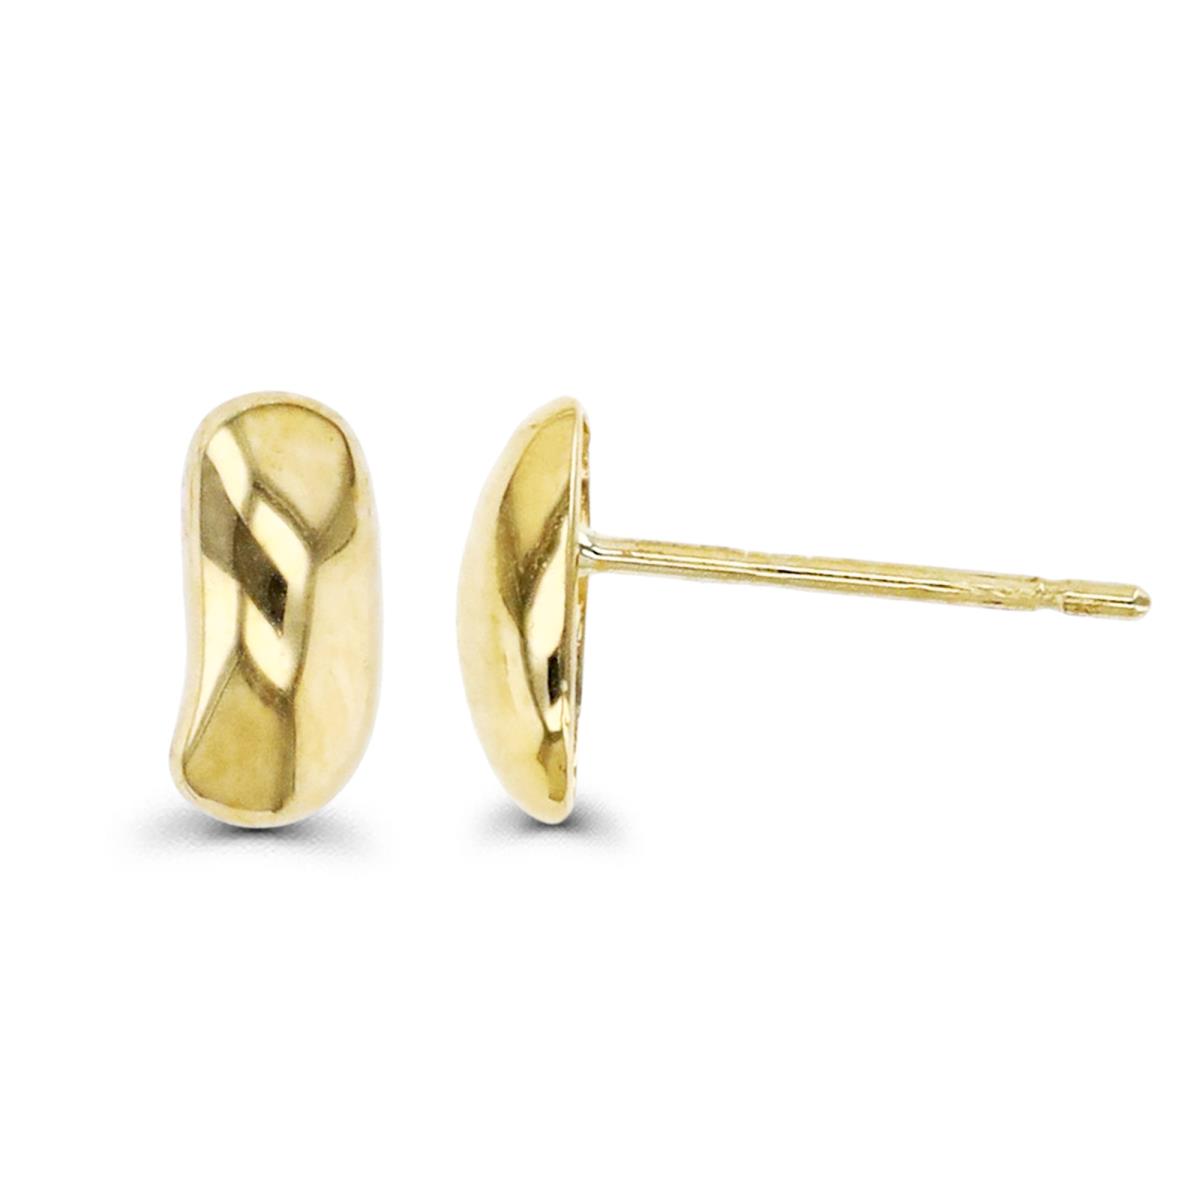 10K Gold Yellow Polished Oval Stud Earring